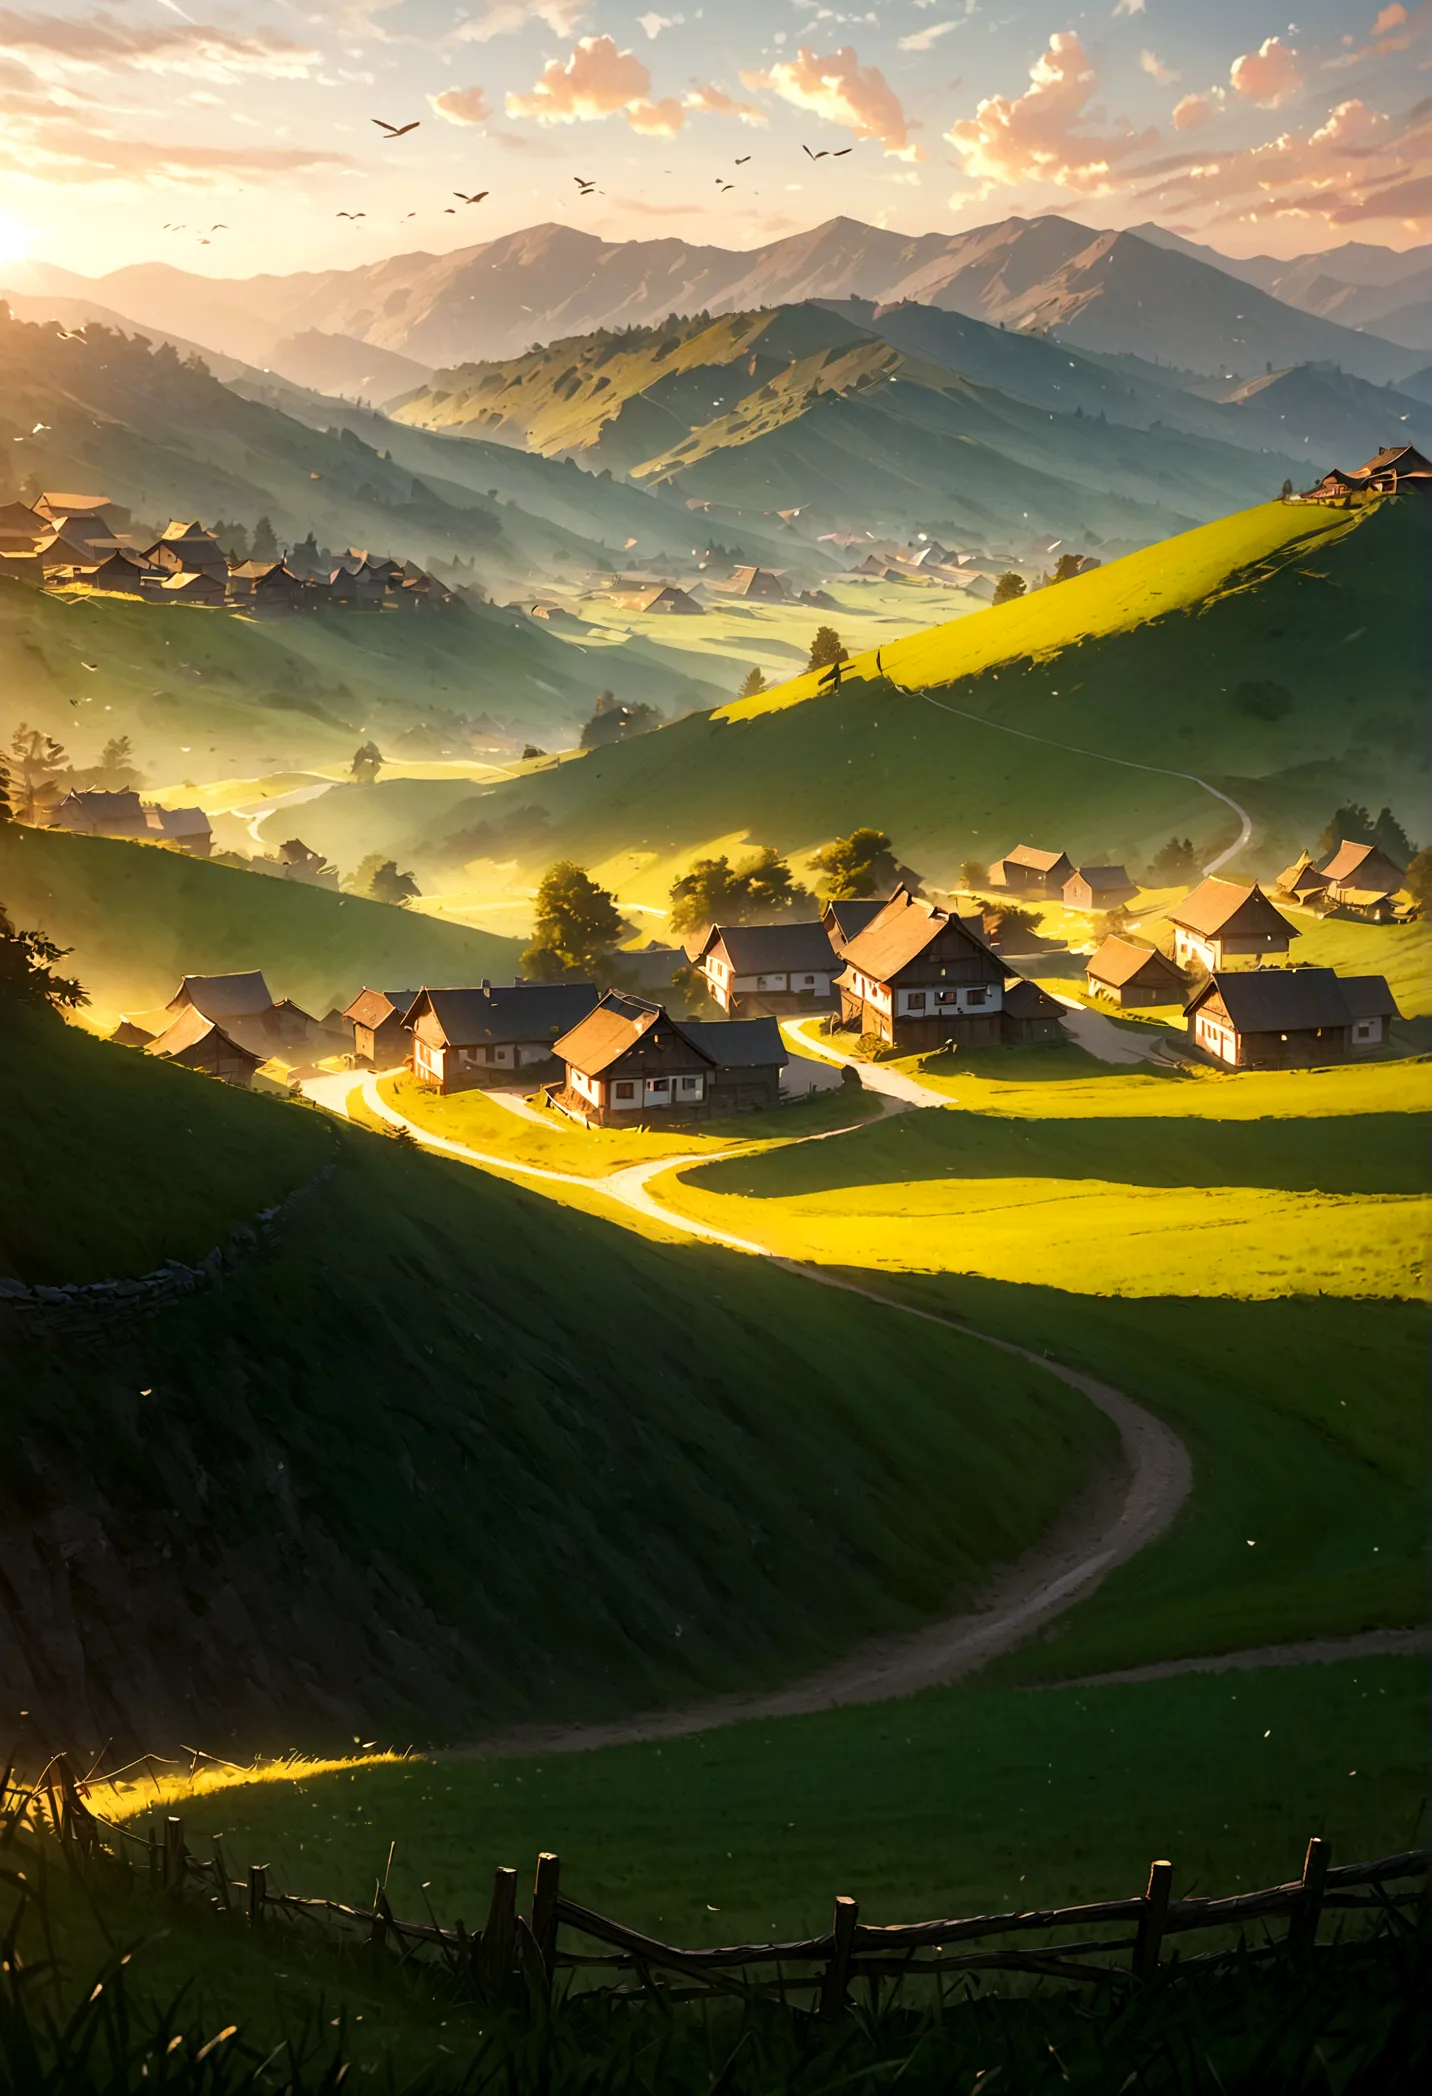 a beautiful sunrise, a peaceful countryside landscape, rolling hills, lush green meadows, a small village in the distance, a woo...